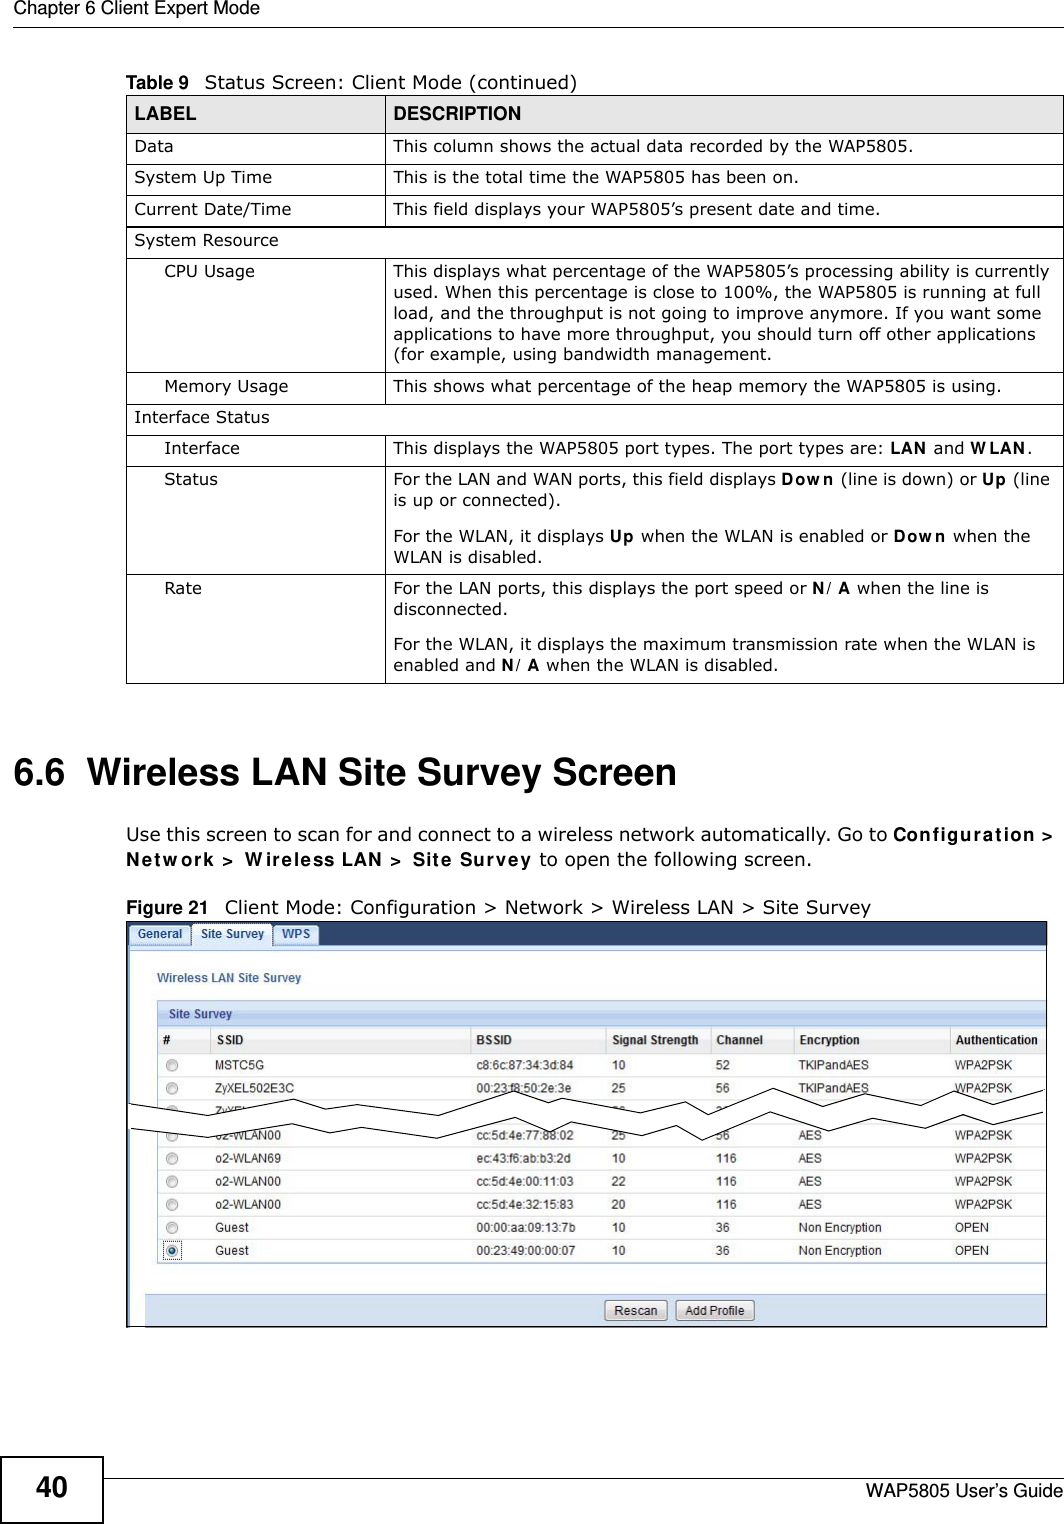 Chapter 6 Client Expert ModeWAP5805 User’s Guide406.6  Wireless LAN Site Survey ScreenUse this screen to scan for and connect to a wireless network automatically. Go to Configuration &gt; Network &gt; Wireless LAN &gt; Site Survey to open the following screen.Figure 21   Client Mode: Configuration &gt; Network &gt; Wireless LAN &gt; Site SurveyData This column shows the actual data recorded by the WAP5805.System Up Time This is the total time the WAP5805 has been on.Current Date/Time This field displays your WAP5805’s present date and time.System ResourceCPU Usage This displays what percentage of the WAP5805’s processing ability is currently used. When this percentage is close to 100%, the WAP5805 is running at full load, and the throughput is not going to improve anymore. If you want some applications to have more throughput, you should turn off other applications (for example, using bandwidth management.Memory Usage This shows what percentage of the heap memory the WAP5805 is using. Interface StatusInterface This displays the WAP5805 port types. The port types are: LAN and WLAN.Status For the LAN and WAN ports, this field displays Down (line is down) or Up (line is up or connected).For the WLAN, it displays Up when the WLAN is enabled or Down when the WLAN is disabled.Rate For the LAN ports, this displays the port speed or N/A when the line is disconnected.For the WLAN, it displays the maximum transmission rate when the WLAN is enabled and N/A when the WLAN is disabled.Table 9   Status Screen: Client Mode (continued)LABEL DESCRIPTION